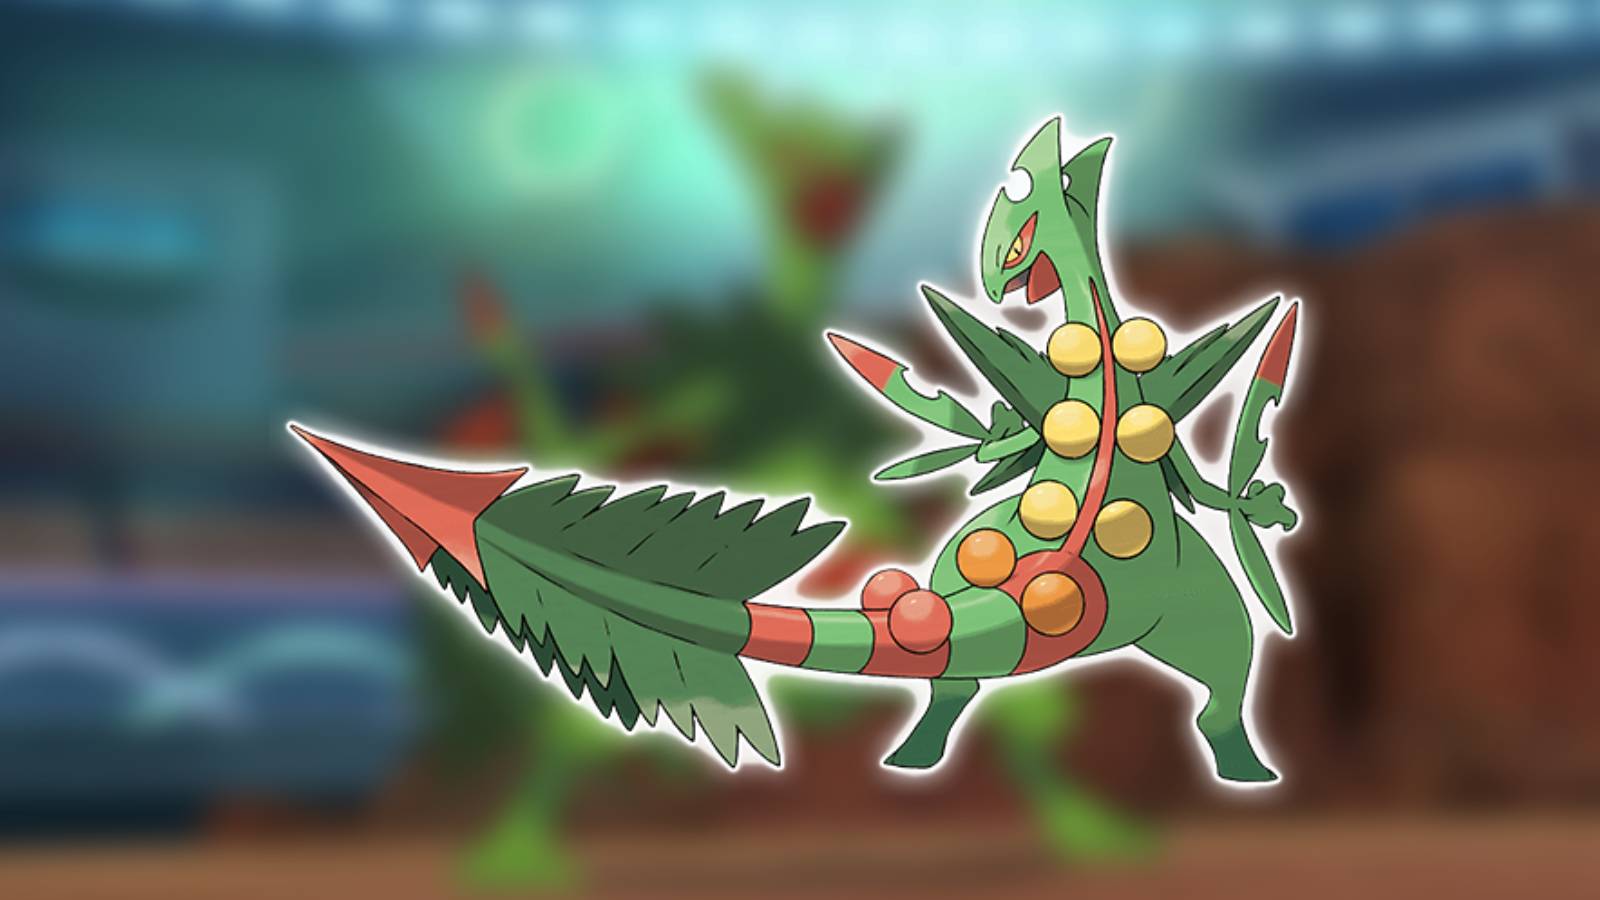 The Pokemon Mega Sceptile appears against a blurred background